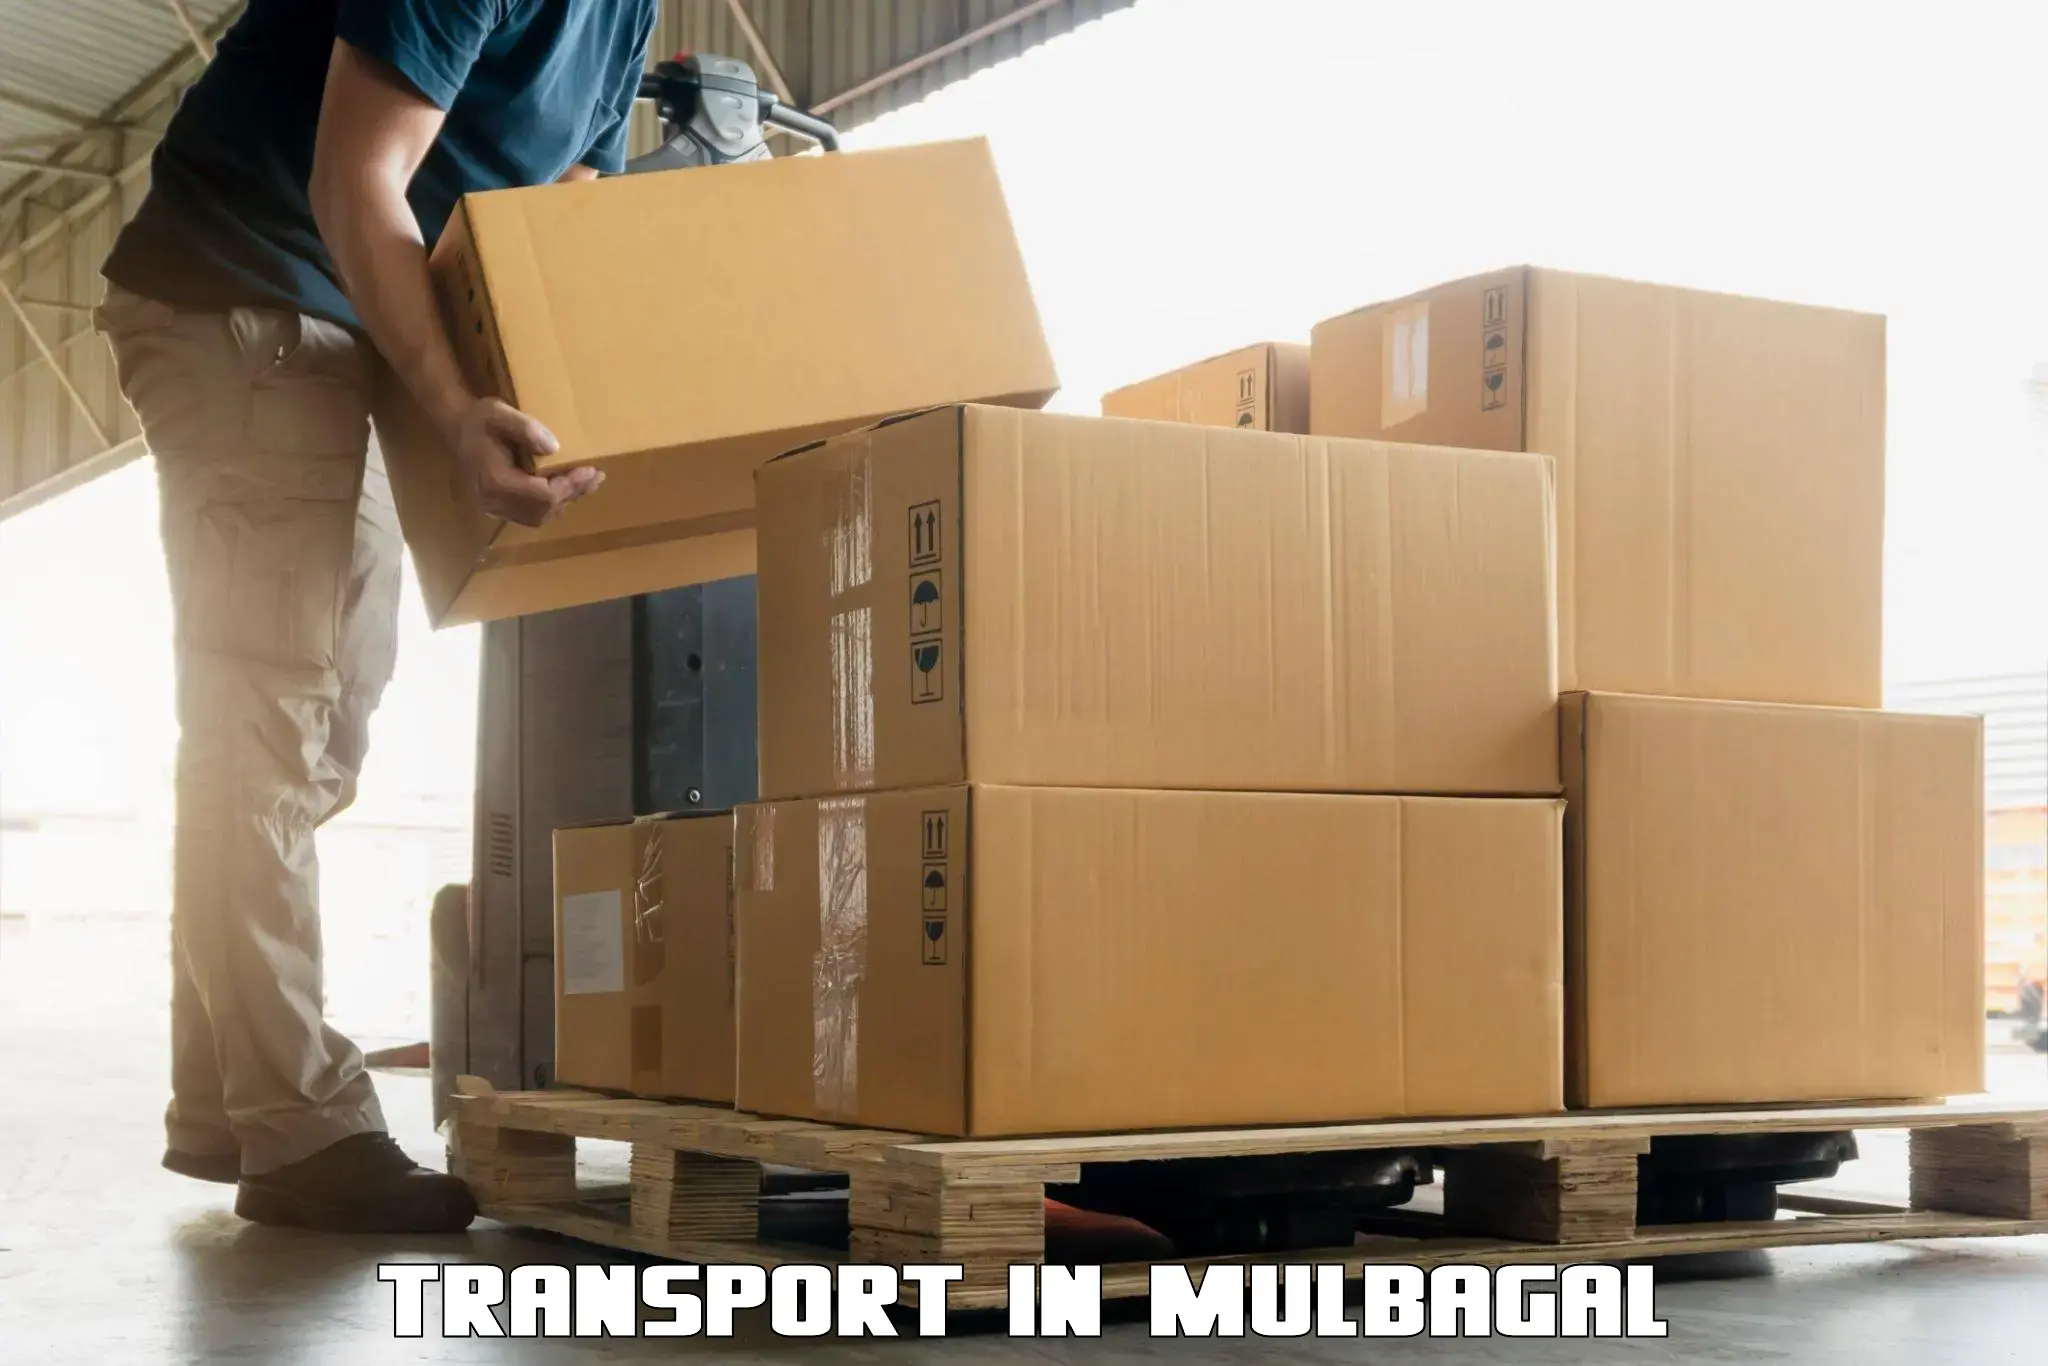 Truck transport companies in India in Mulbagal